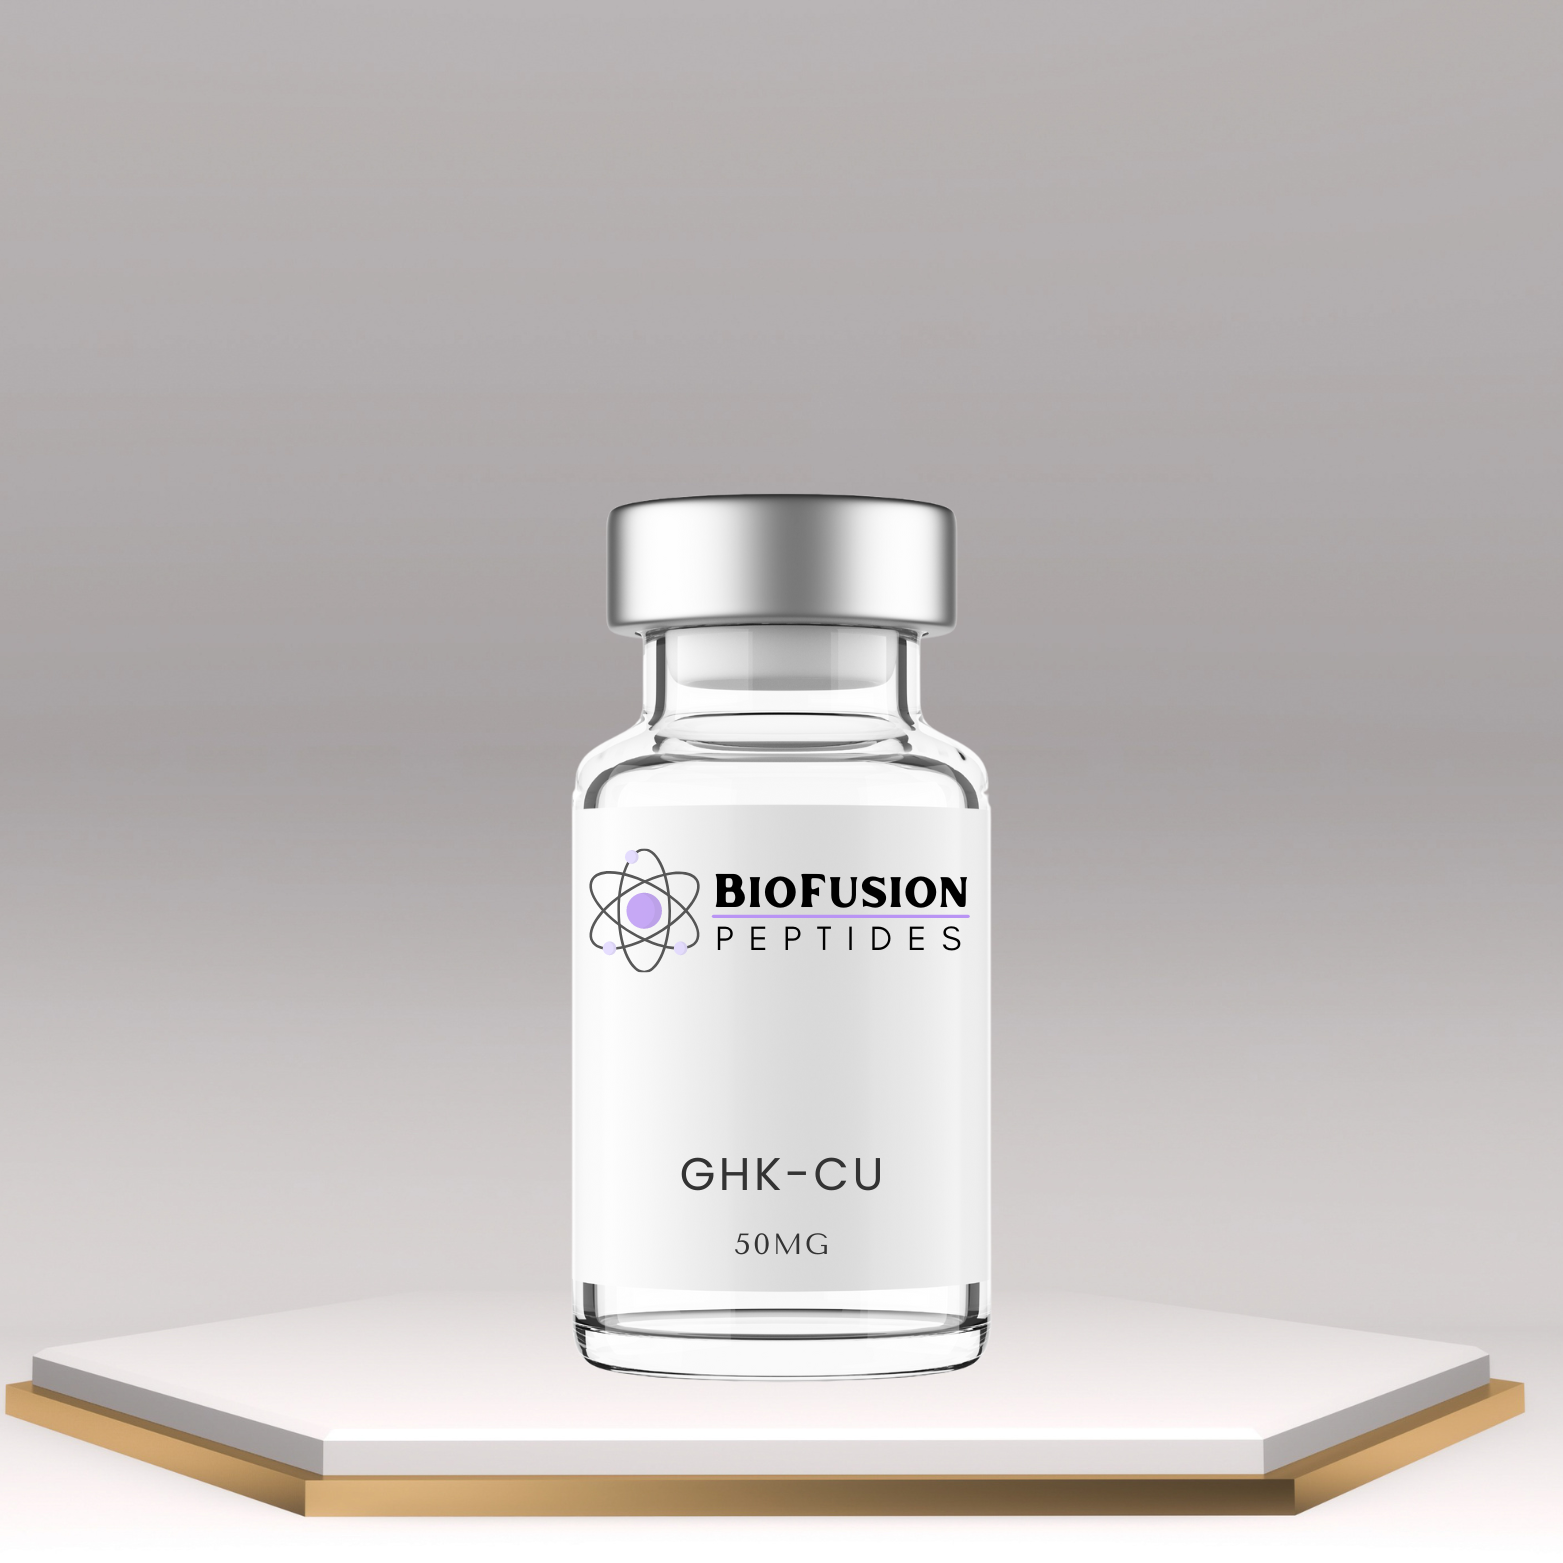 BioFusion Peptides GHK-Cu 50MG vial